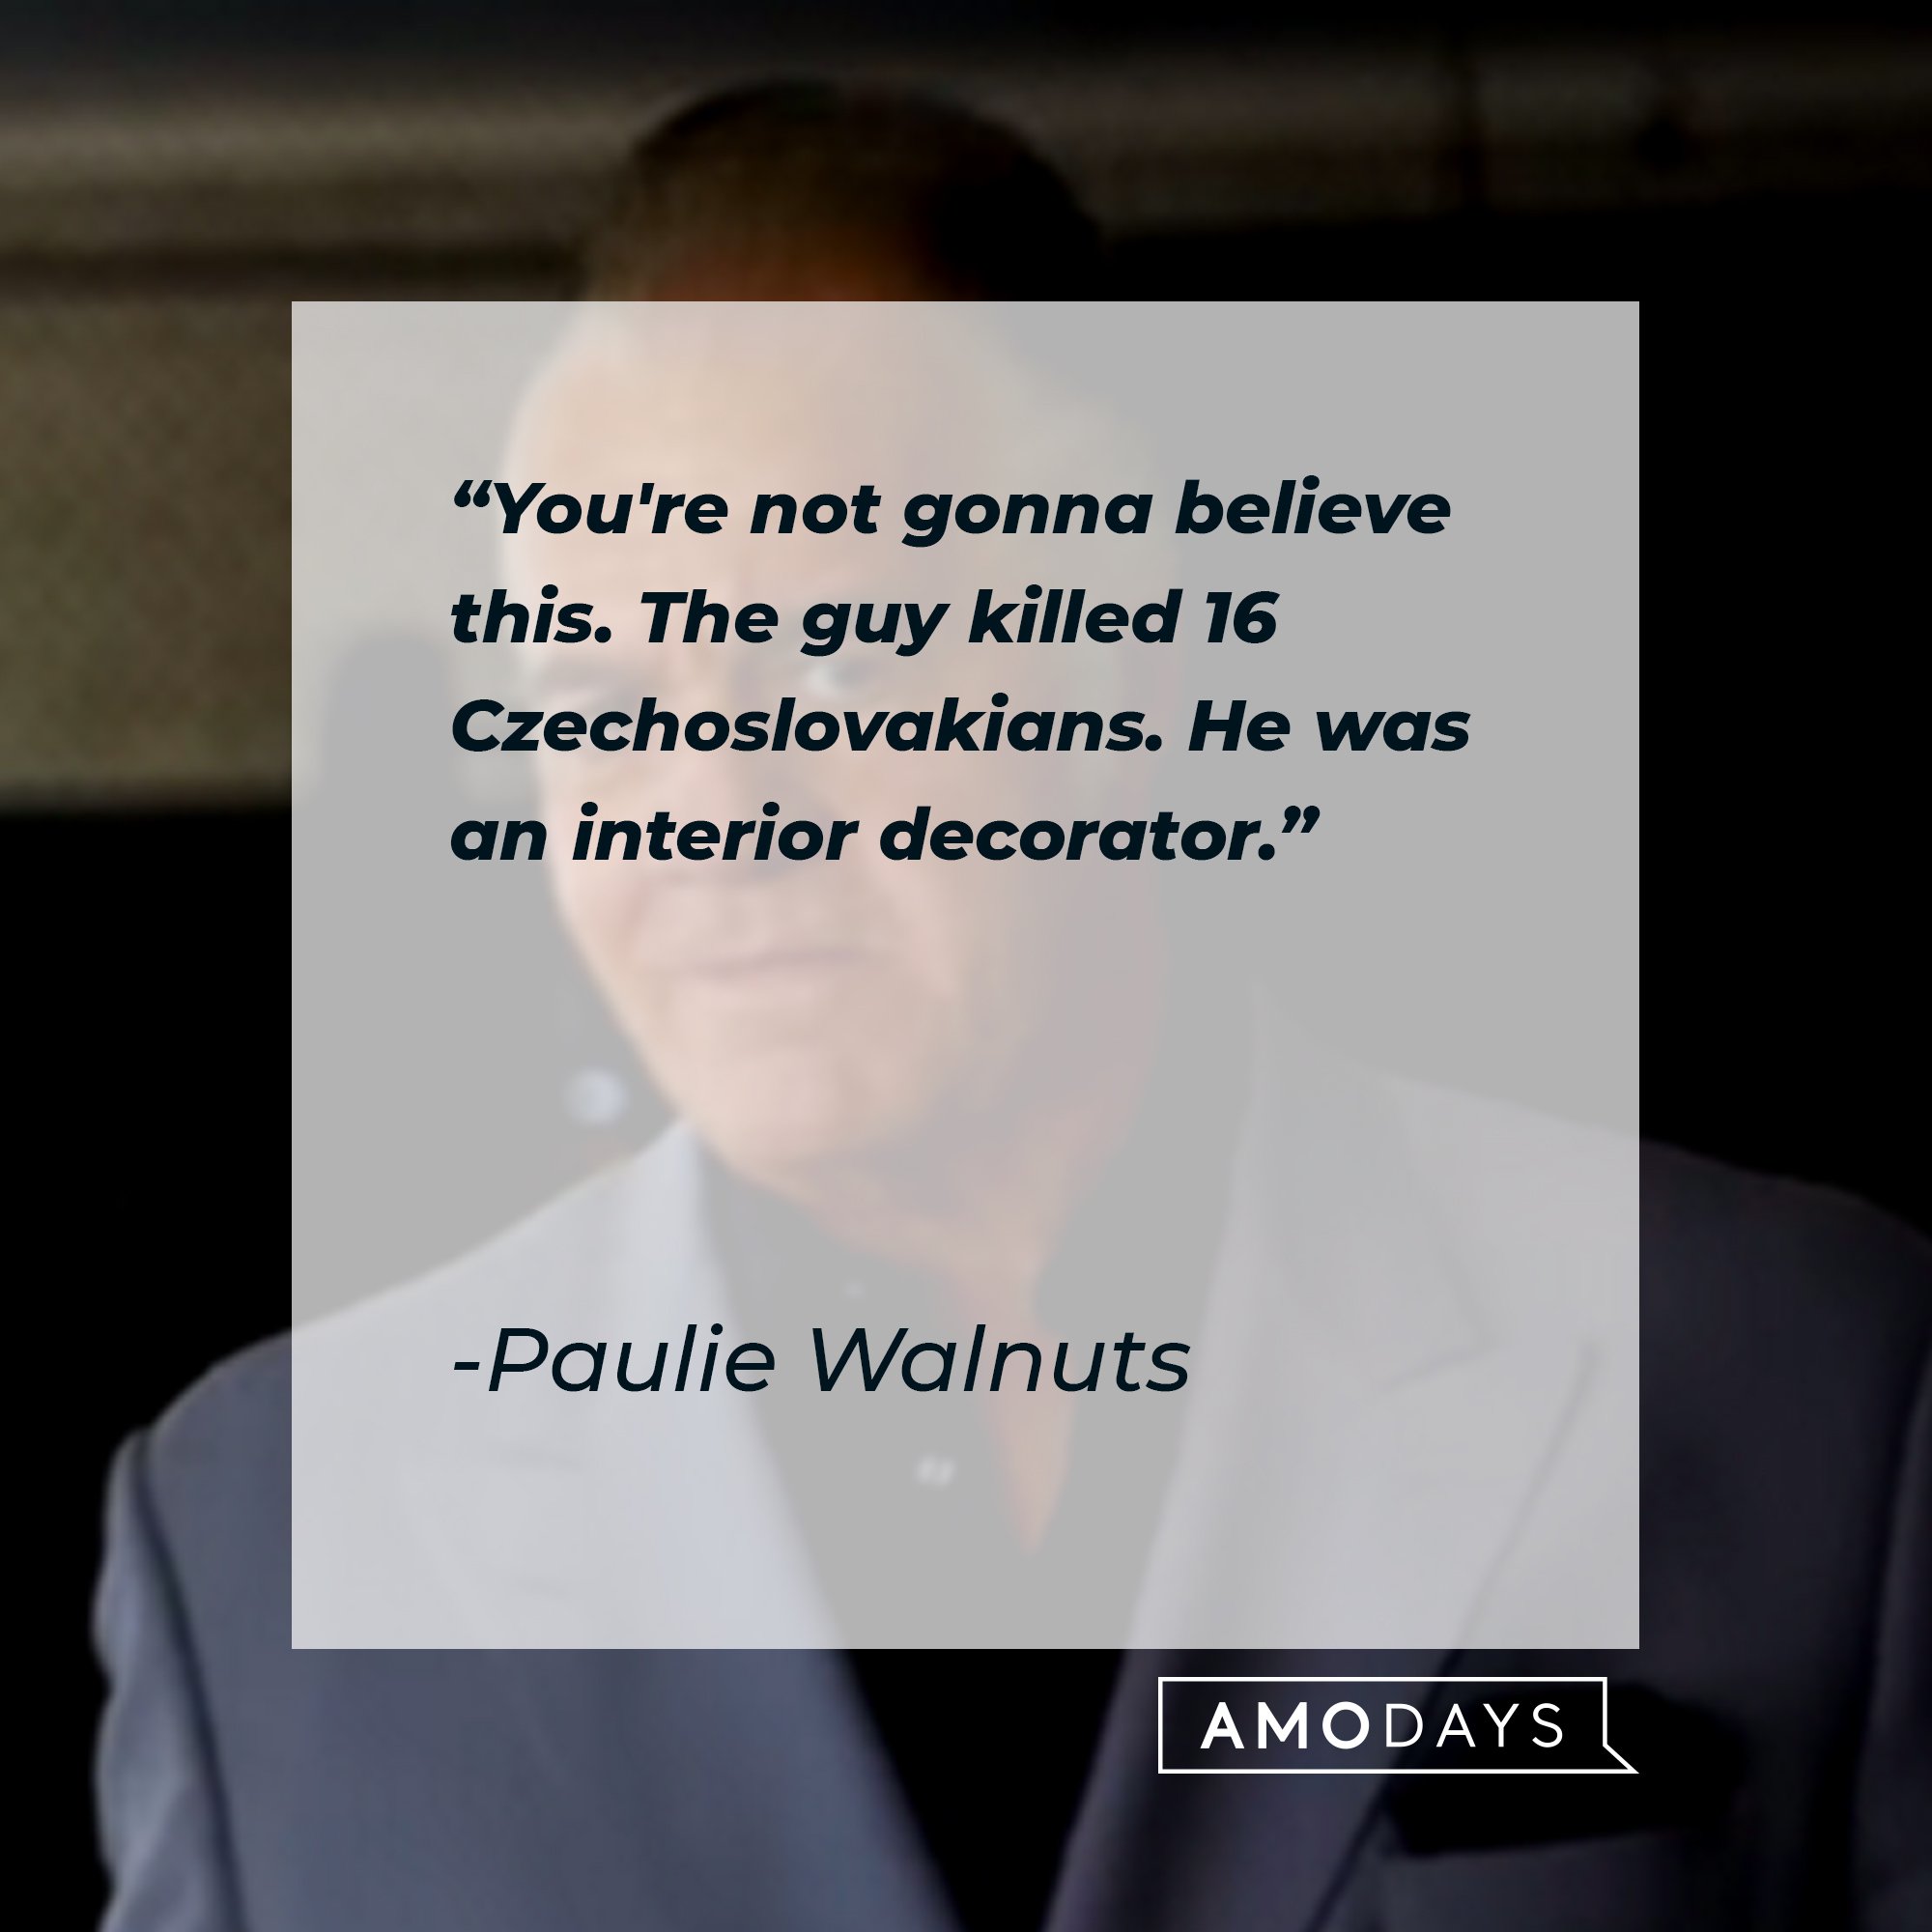 Paulie Walnuts' quote: "You're not gonna believe this. The guy killed 16 Czechoslovakians. He was an interior decorator." | Image: AmoDays 